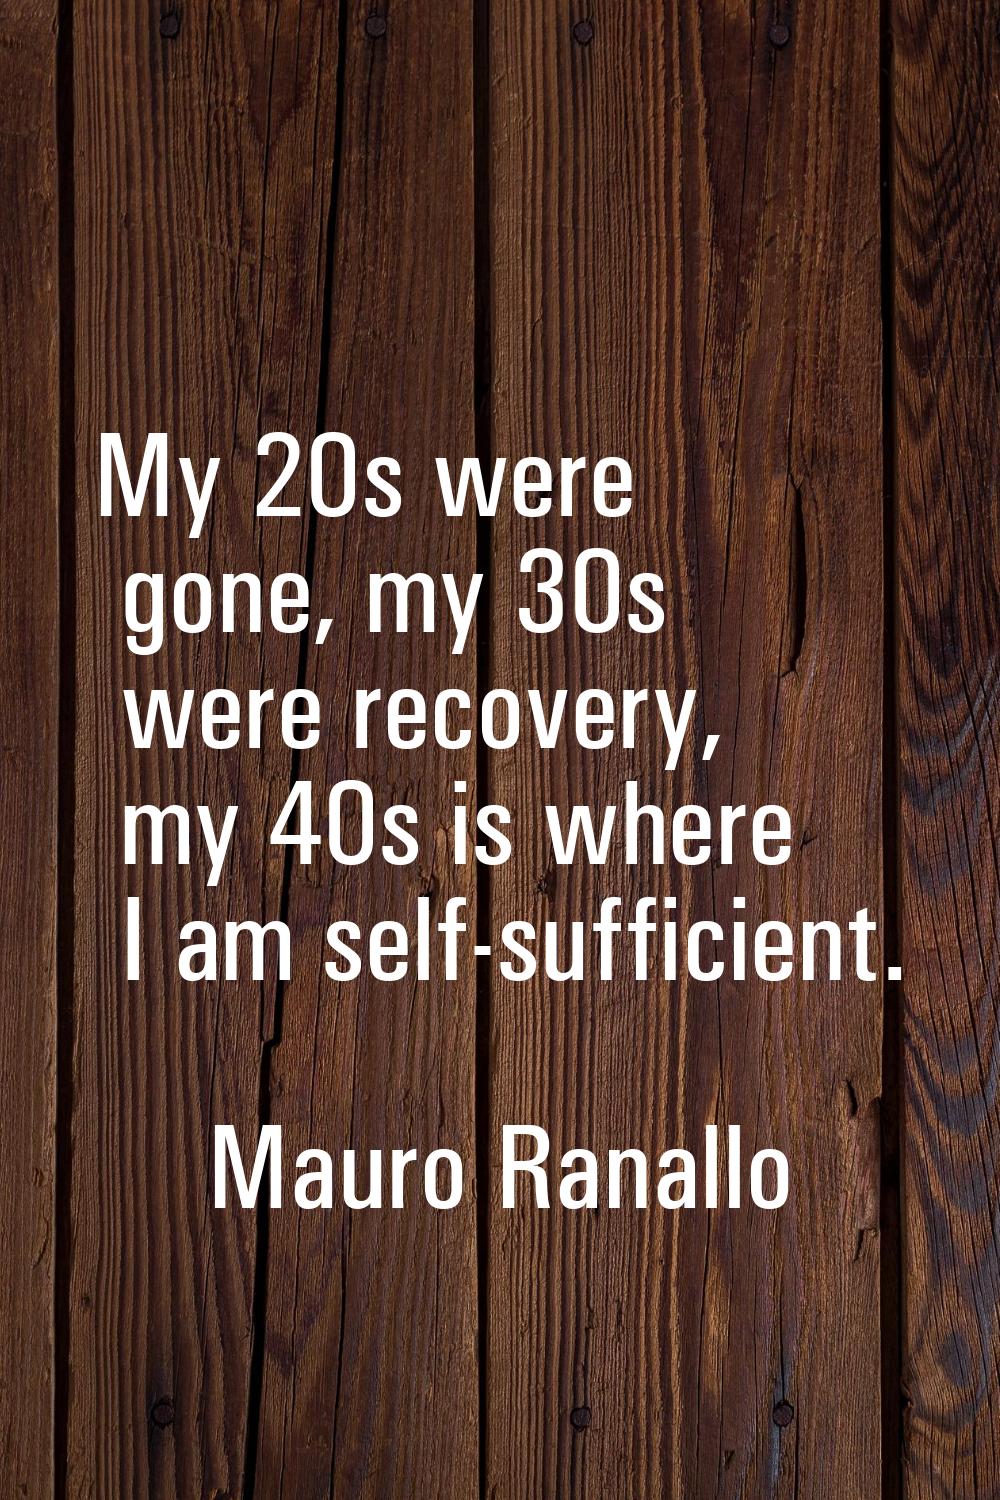 My 20s were gone, my 30s were recovery, my 40s is where I am self-sufficient.